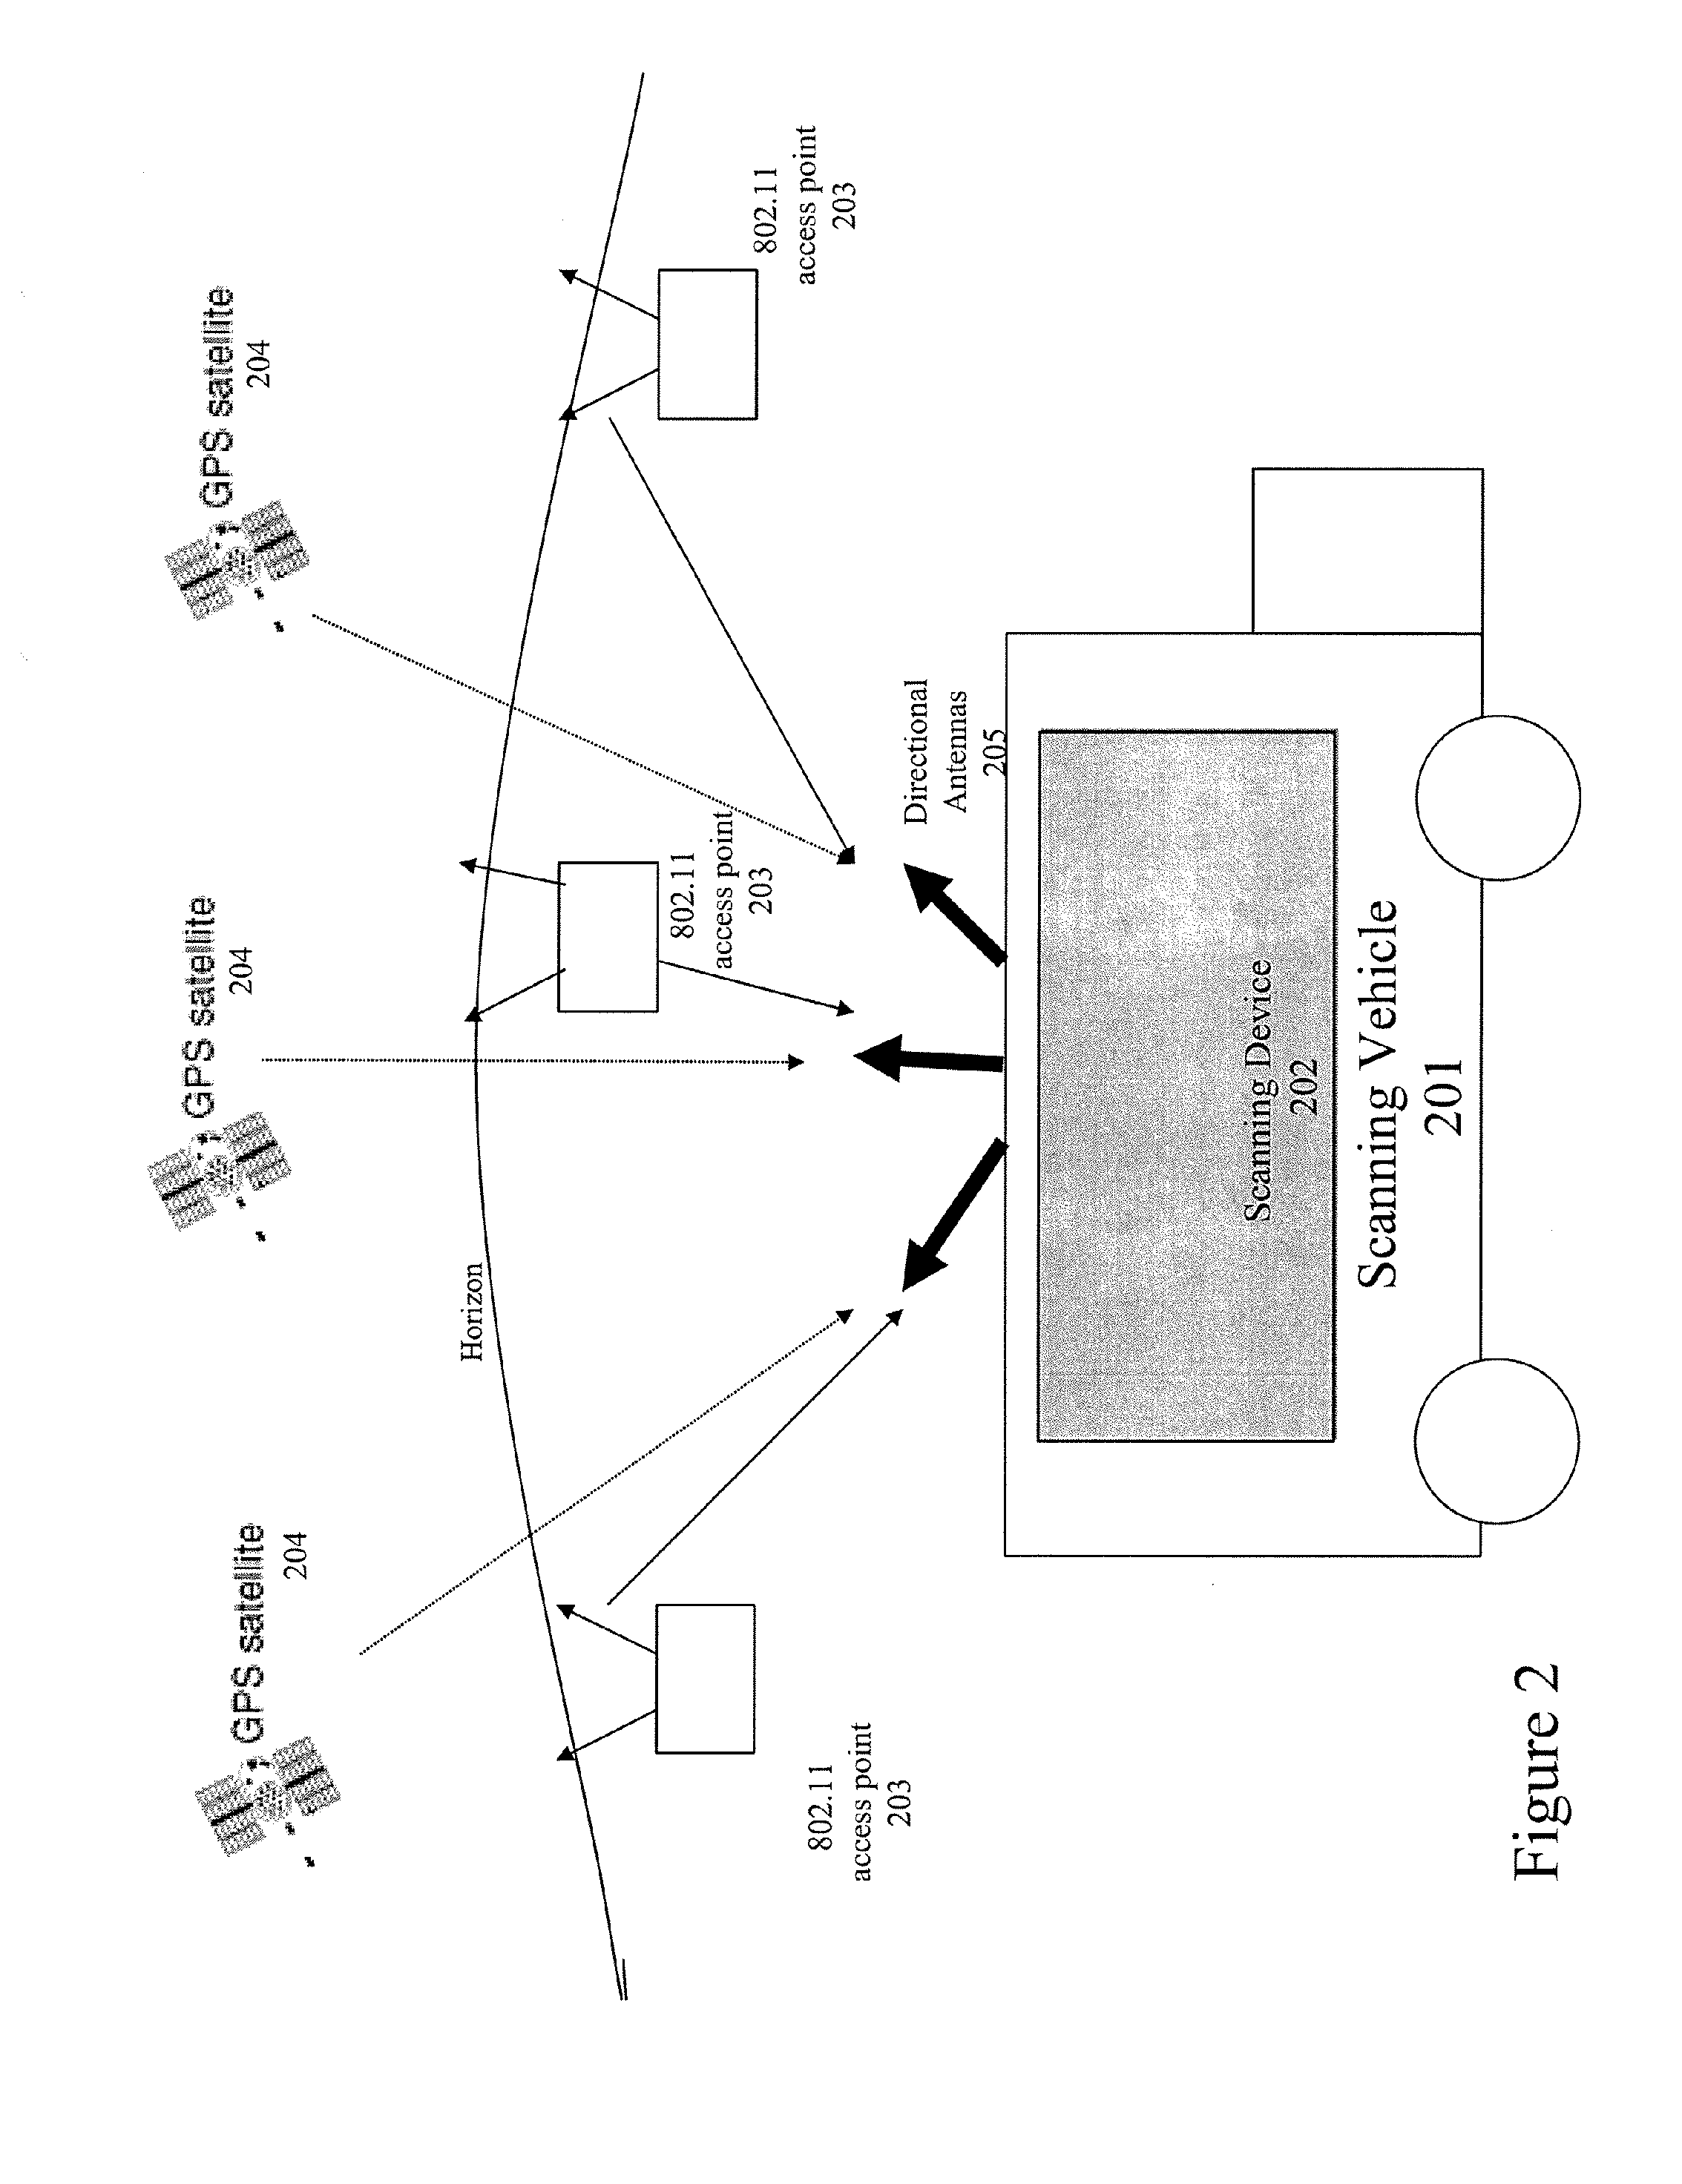 Method and system for selecting and providing a relevant subset of wi-fi location information to a mobile client device so the client device may estimate its position with efficient utilization of resources